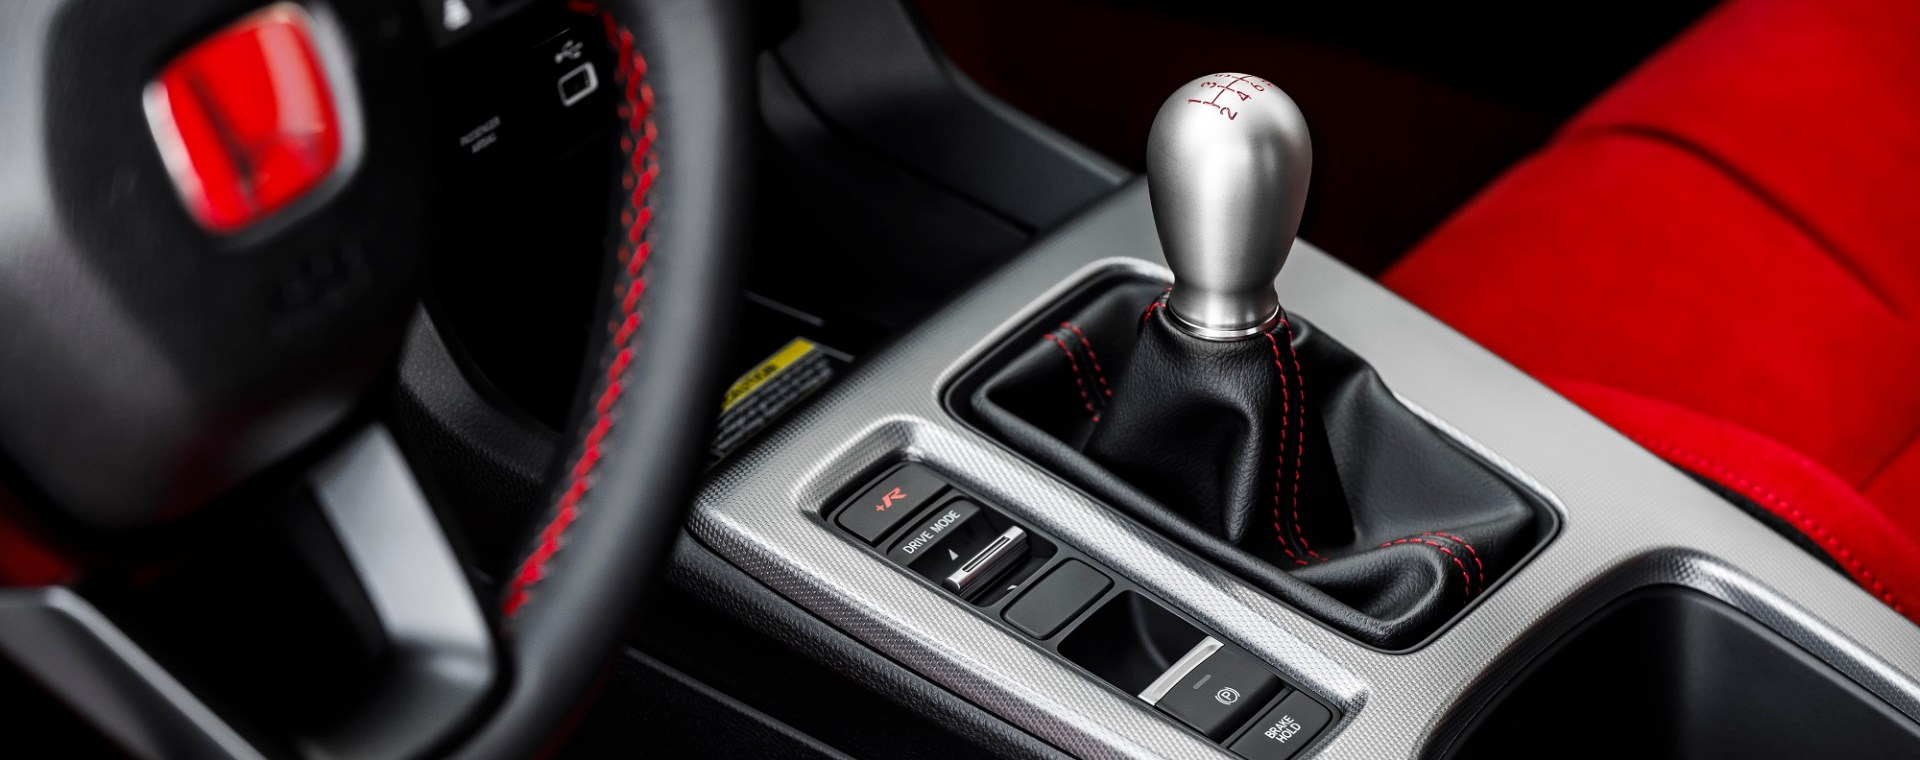 The aluminum shift knob in the new 2023 Honda Civic Type R is a a fitting centerpiece for a hot hatch.